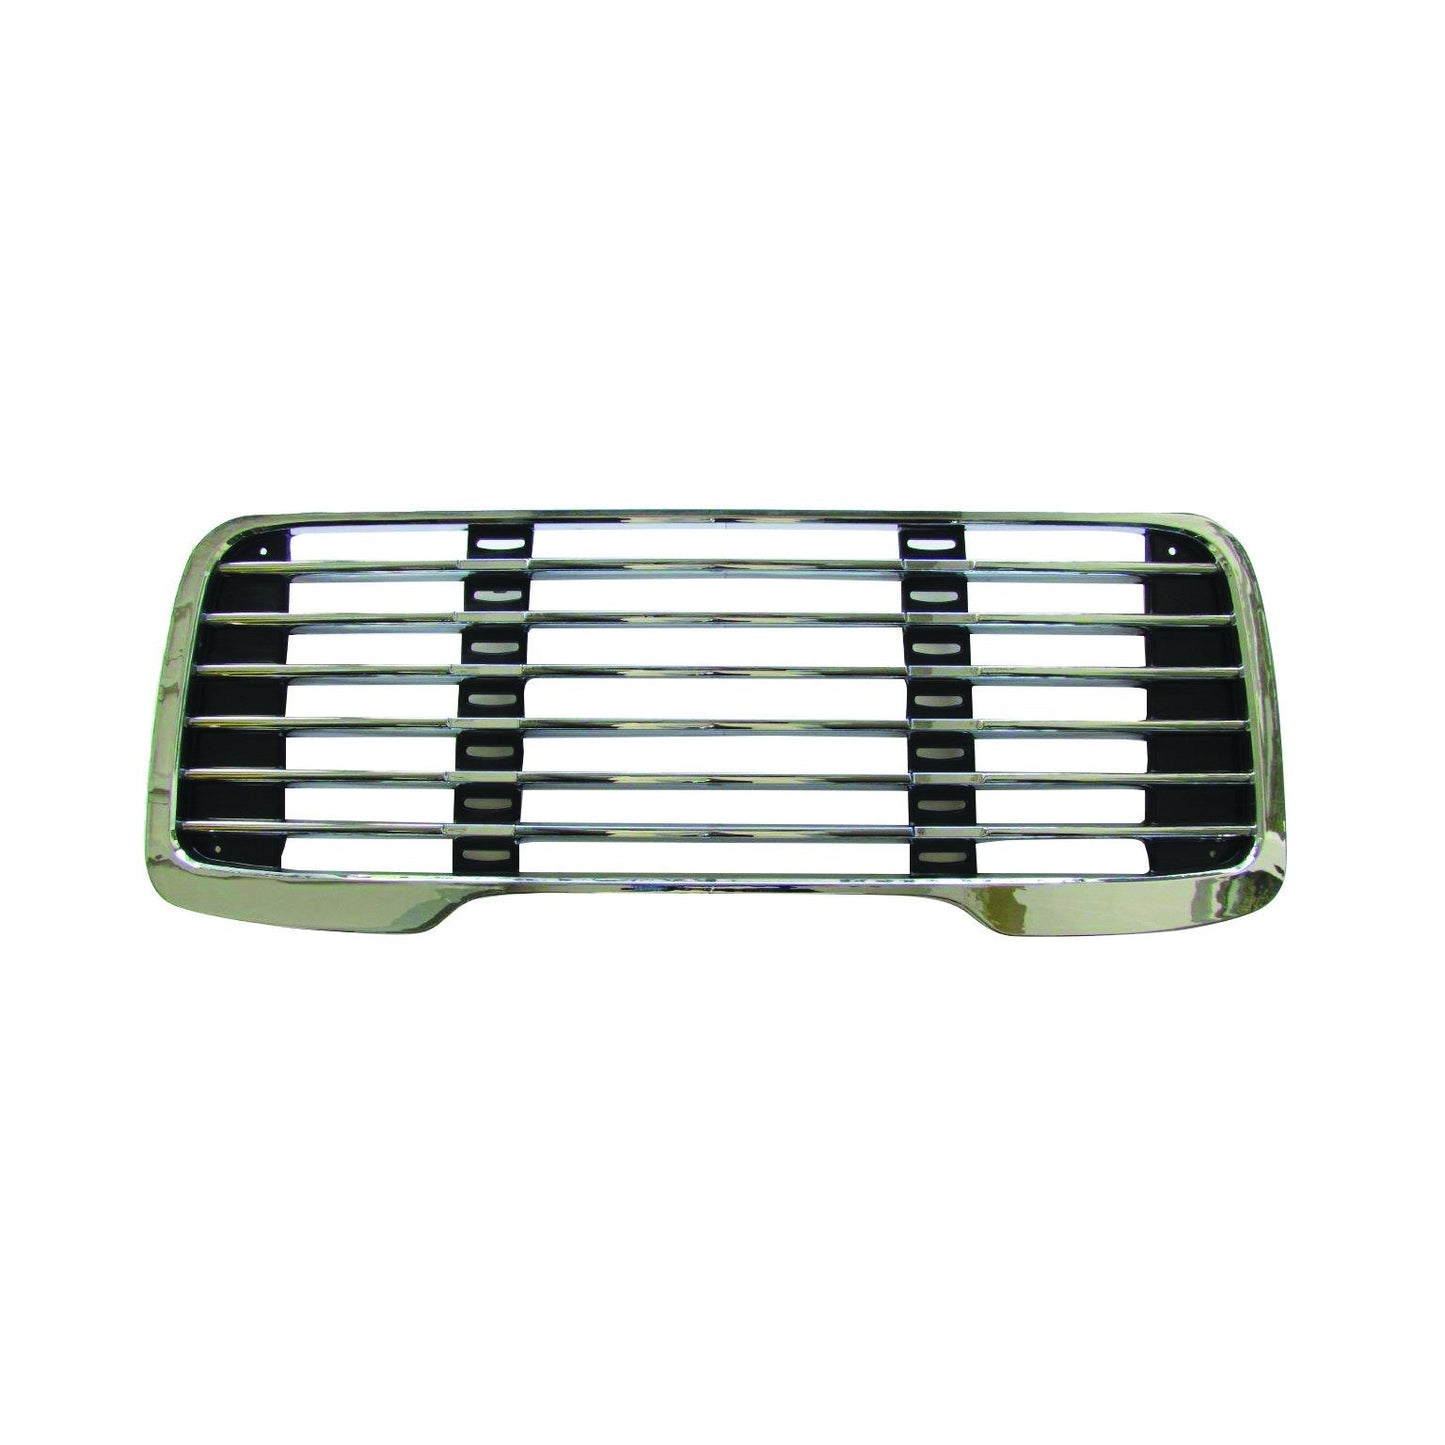 Fortpro Chrome Front Grille Compatible with Freightliner M2 Replaces OEM part: A17-14787-001, A17-14787-000 | F247523